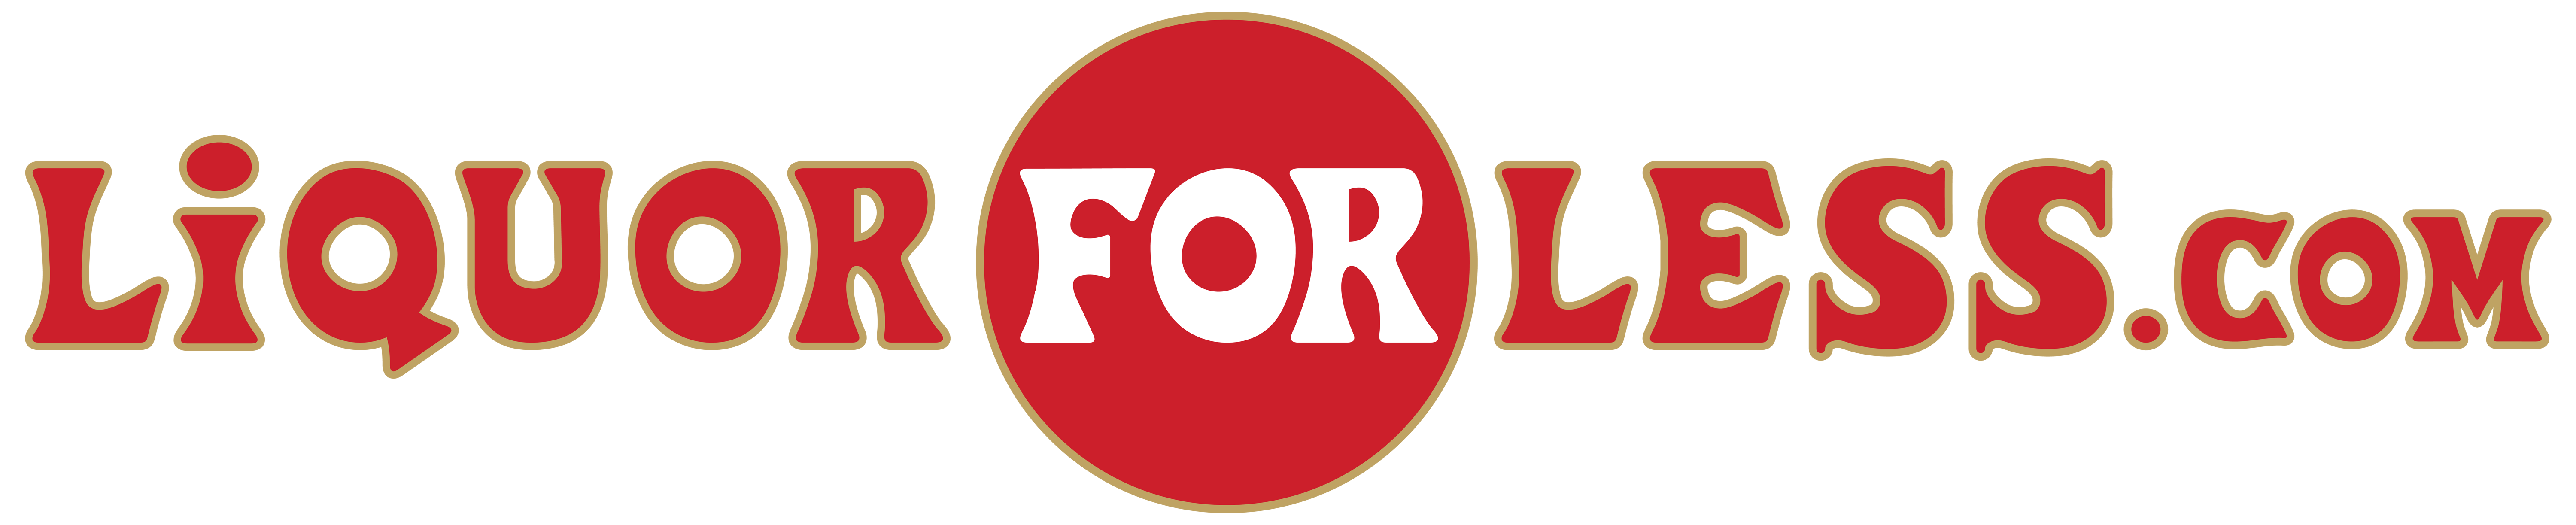 Logo for LiquorForLess.com, composed of stylized red and gold lettering with a red oval background highlighting the 'FOR' in the center. The text is designed with a playful, retro font.